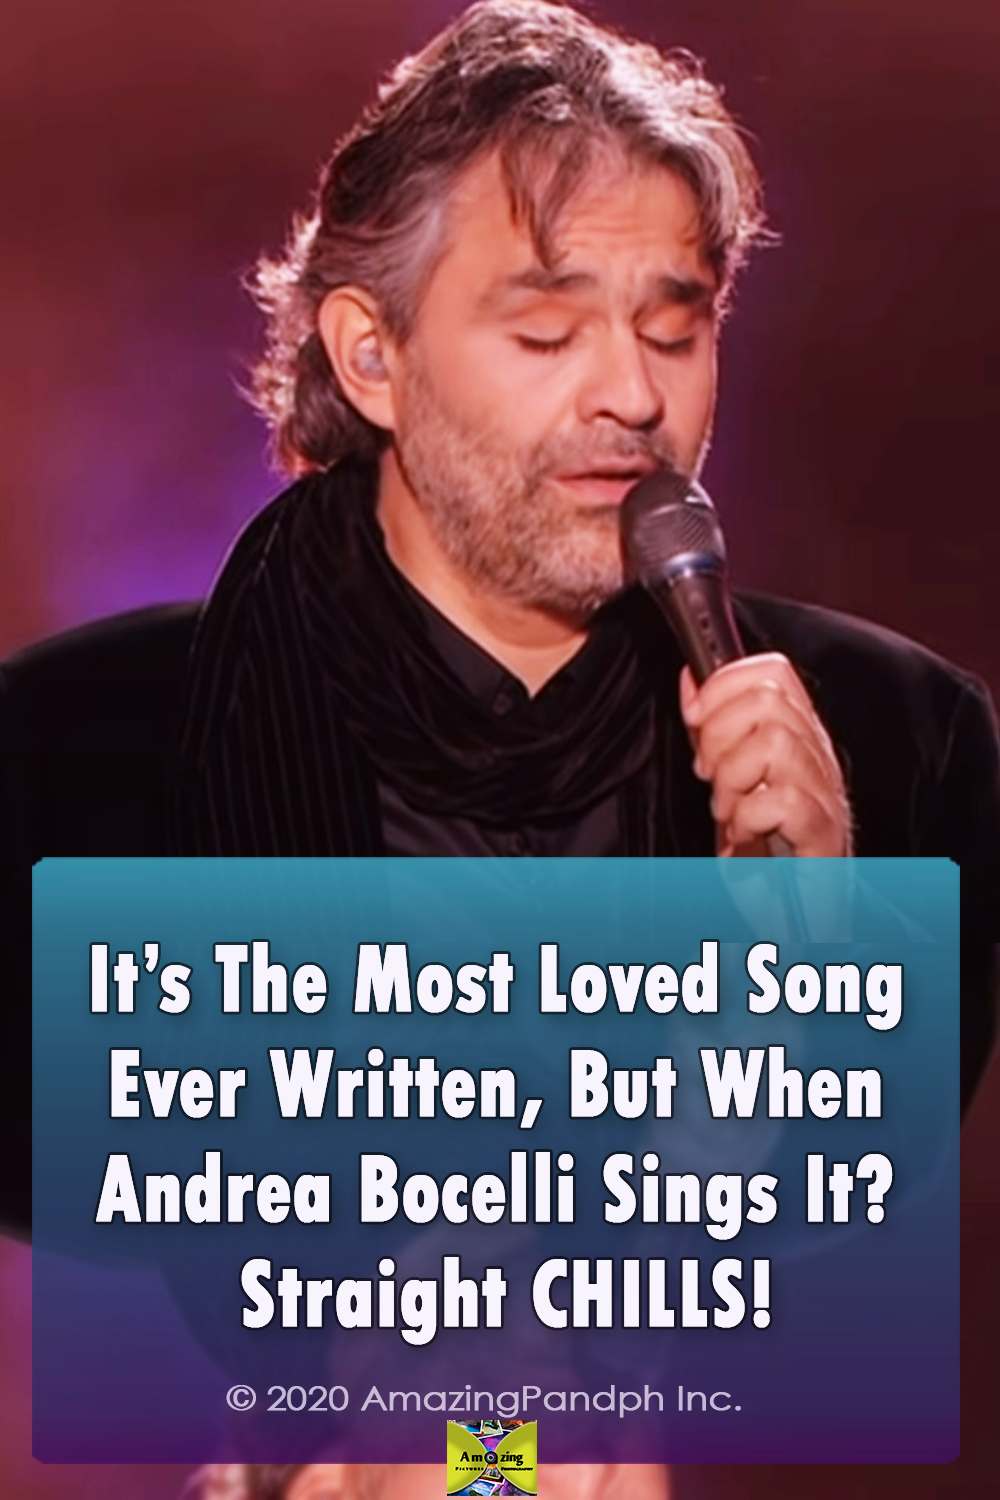 Andrea Bocelli, Chills, song, voice, classic, love song,